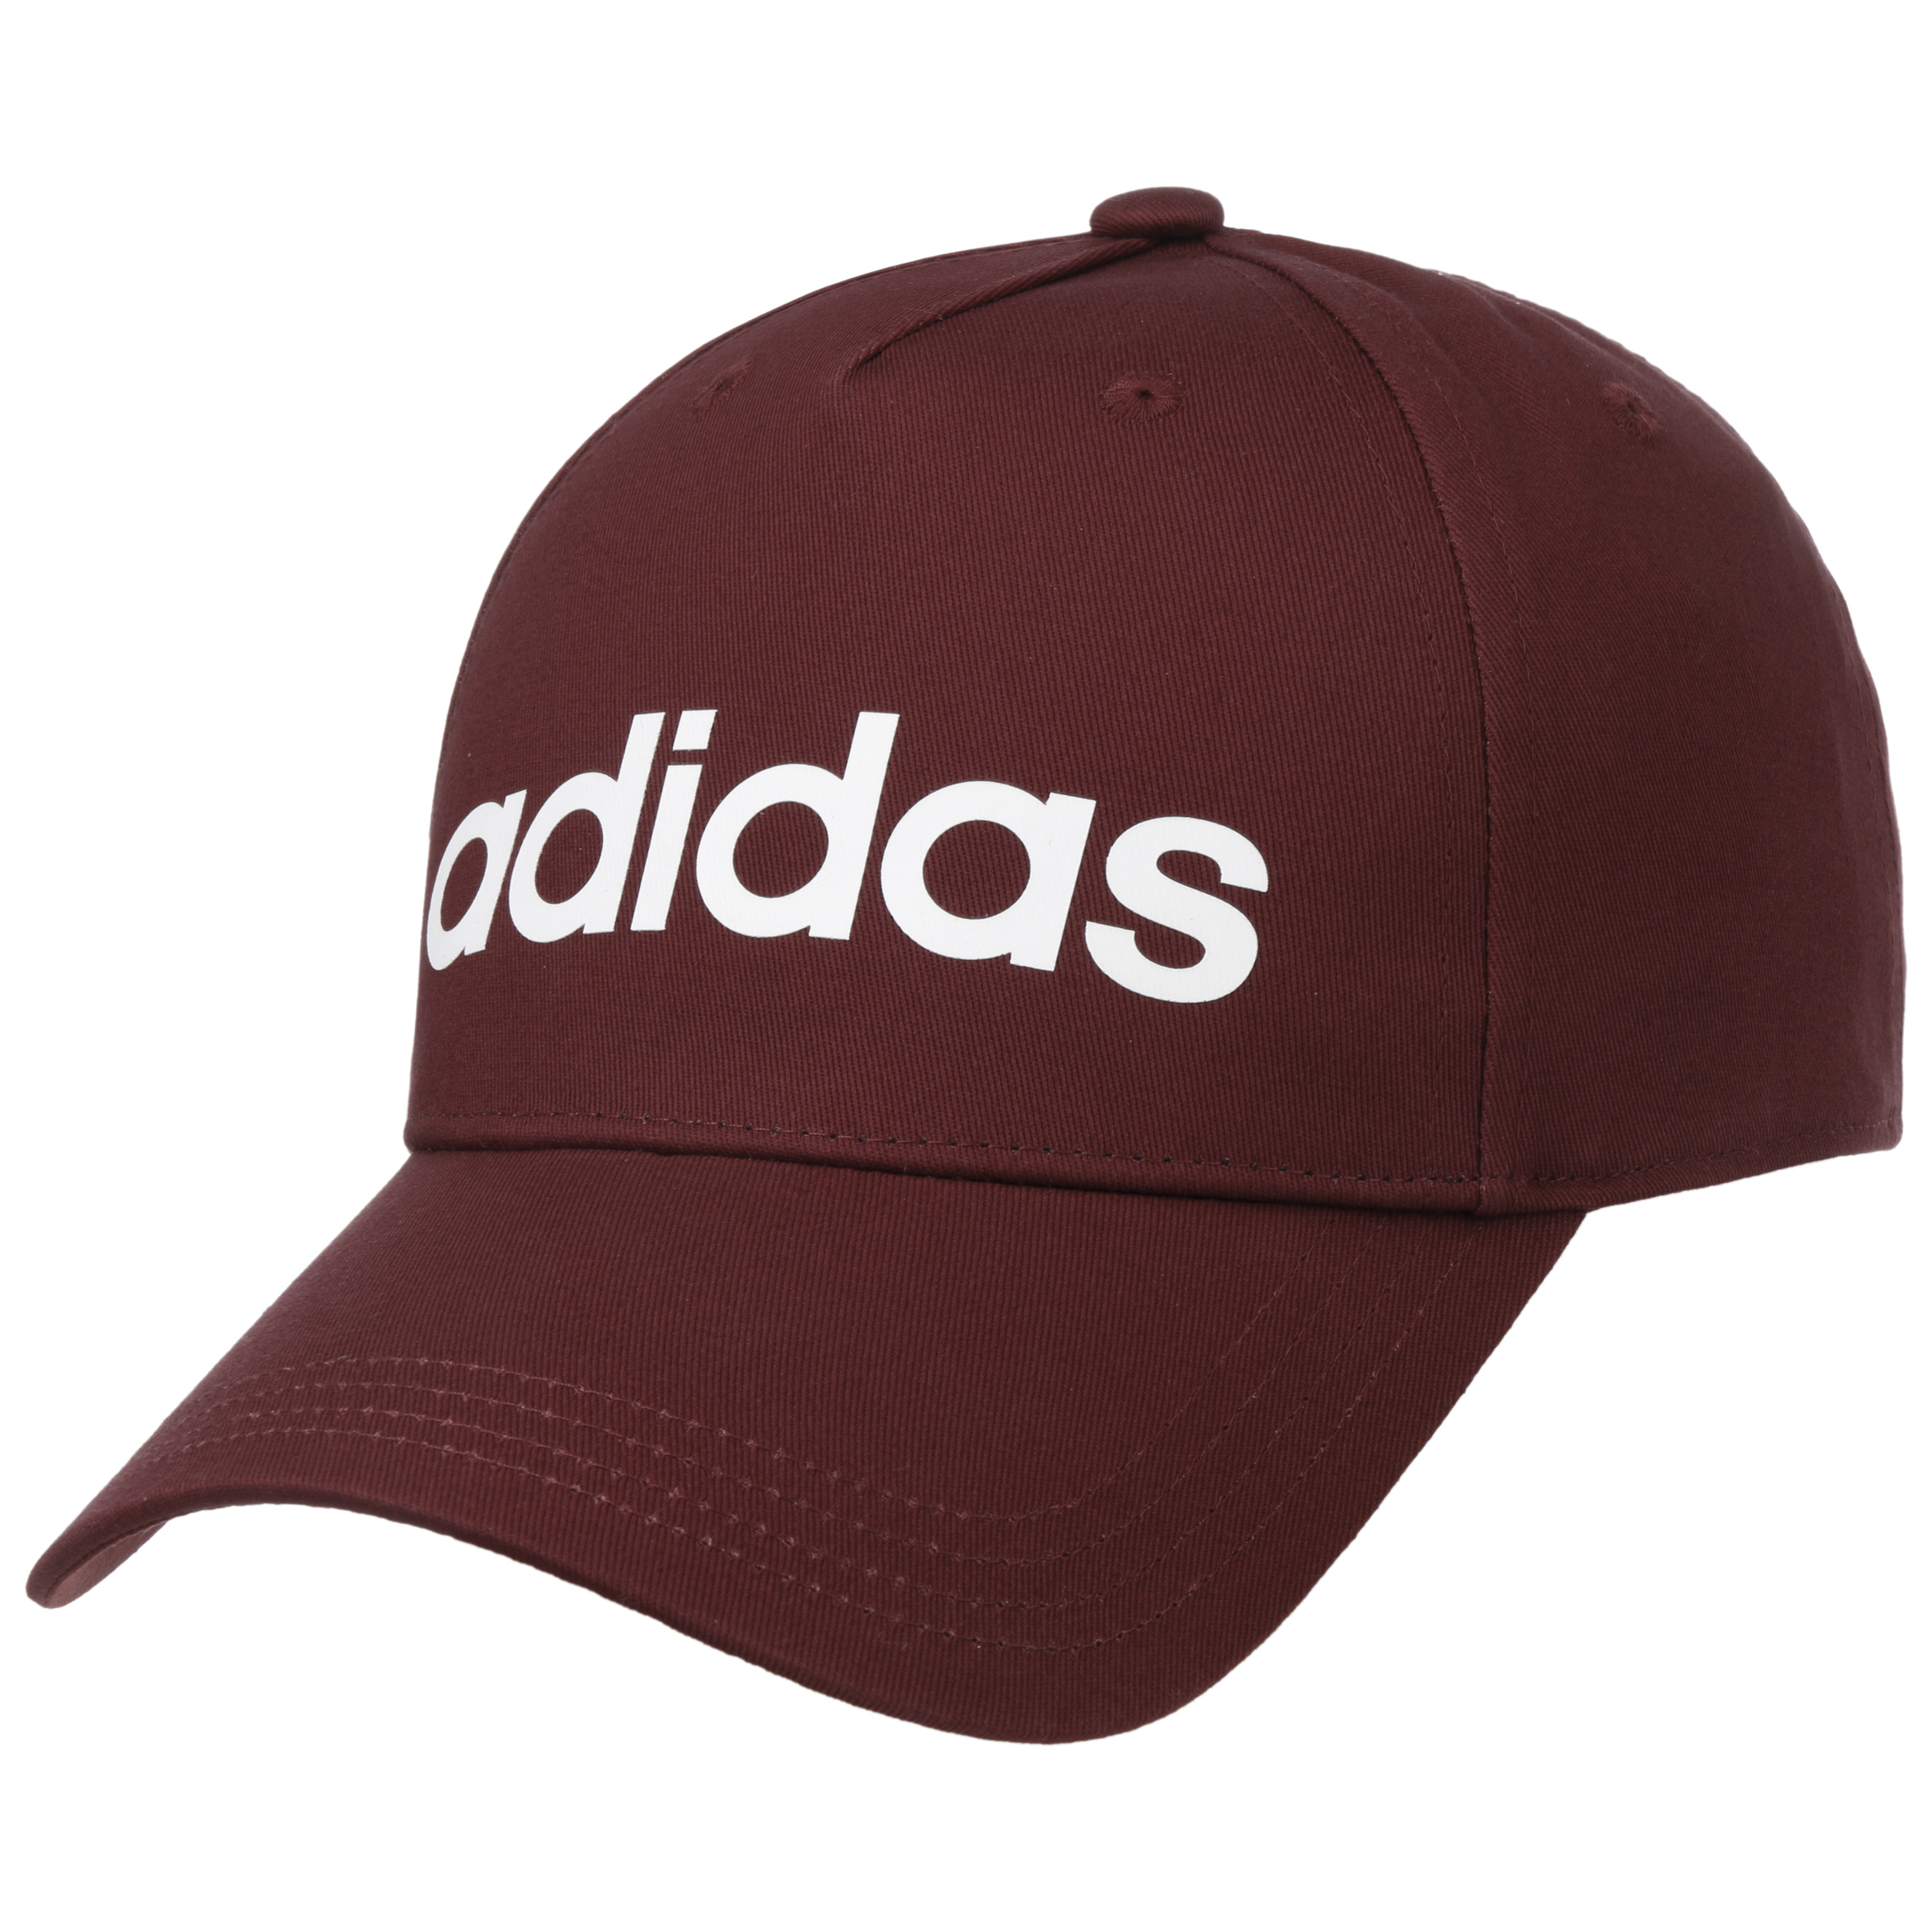 Dormitory mow To separate Daily Cap by adidas - 17,95 €